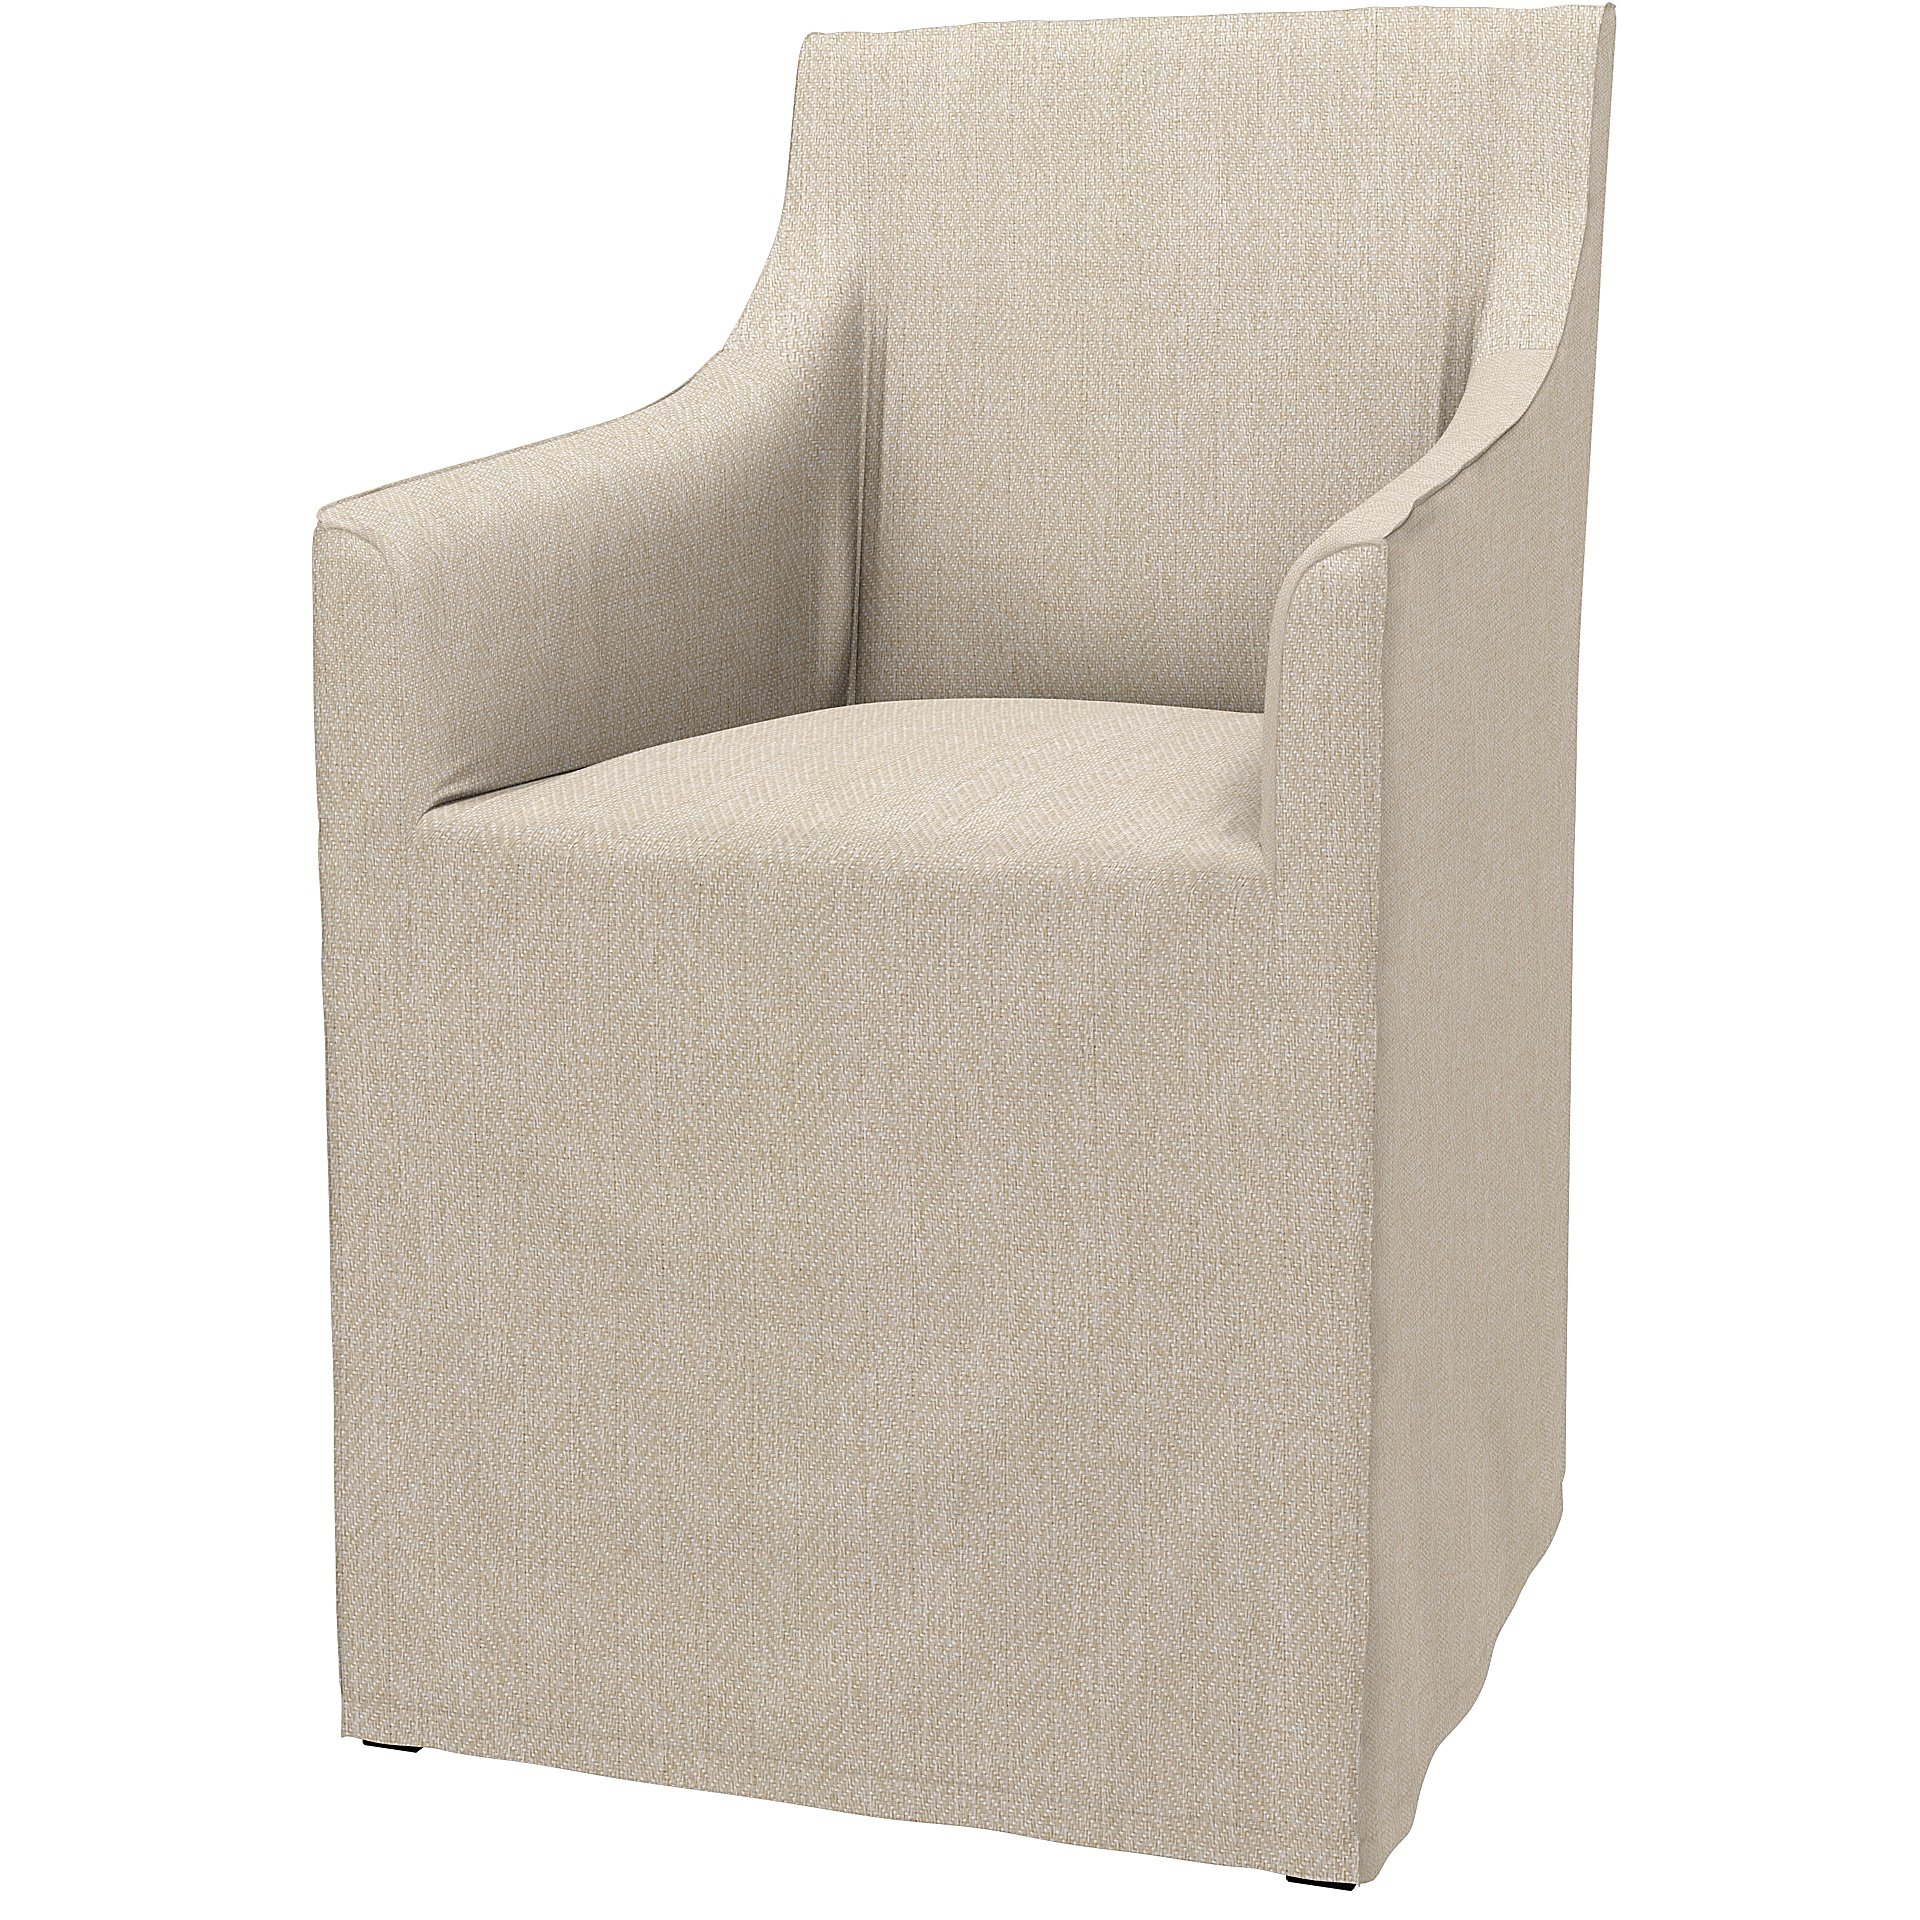 IKEA - Sakarias Chair with Armrests Cover, Natural, Boucle & Texture - Bemz